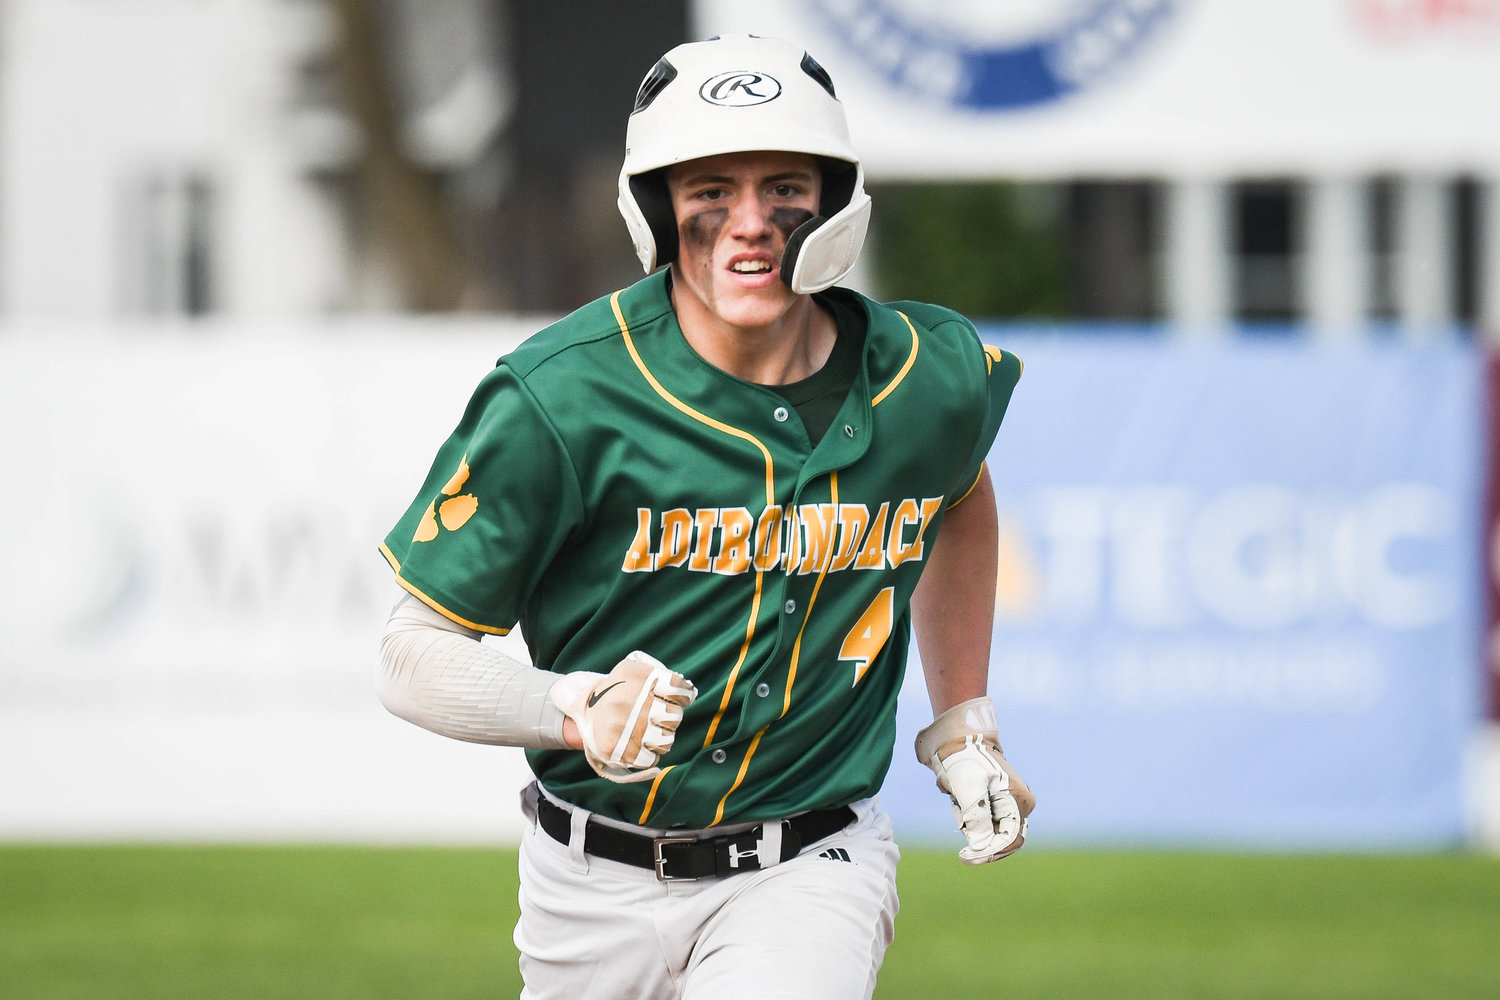 Adirondack baserunner Bailey Gleasman races to third base during the Section III Class C semifinal against Bishop Ludden on Saturday at Donovan Stadium at Murnane Field in Utica. He was 2-for-3 with a double and stolen base in the Wildcats' 6-1 win.